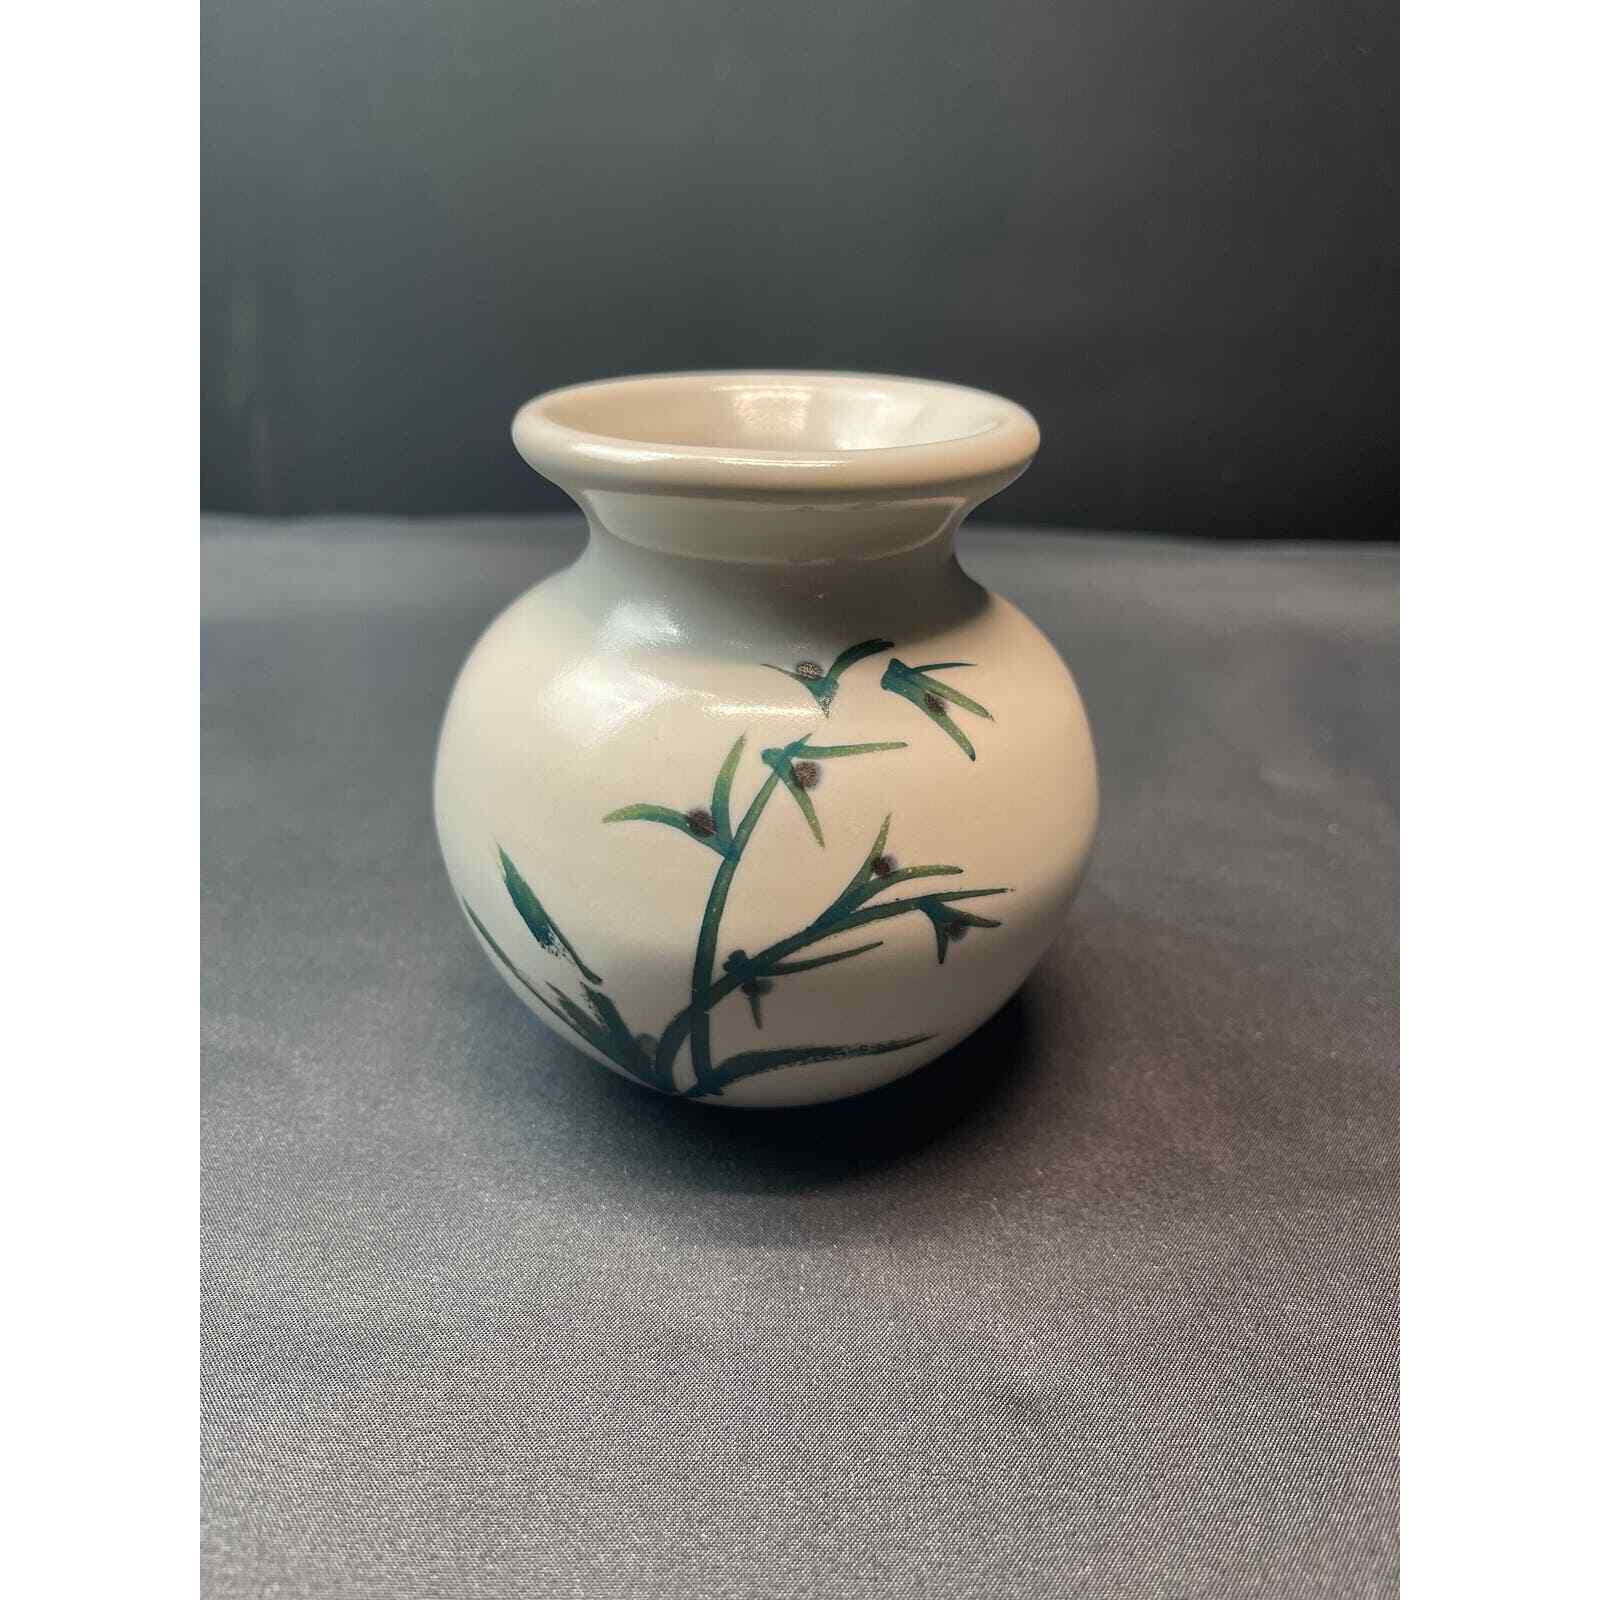 Hand painted olive branches small vase.